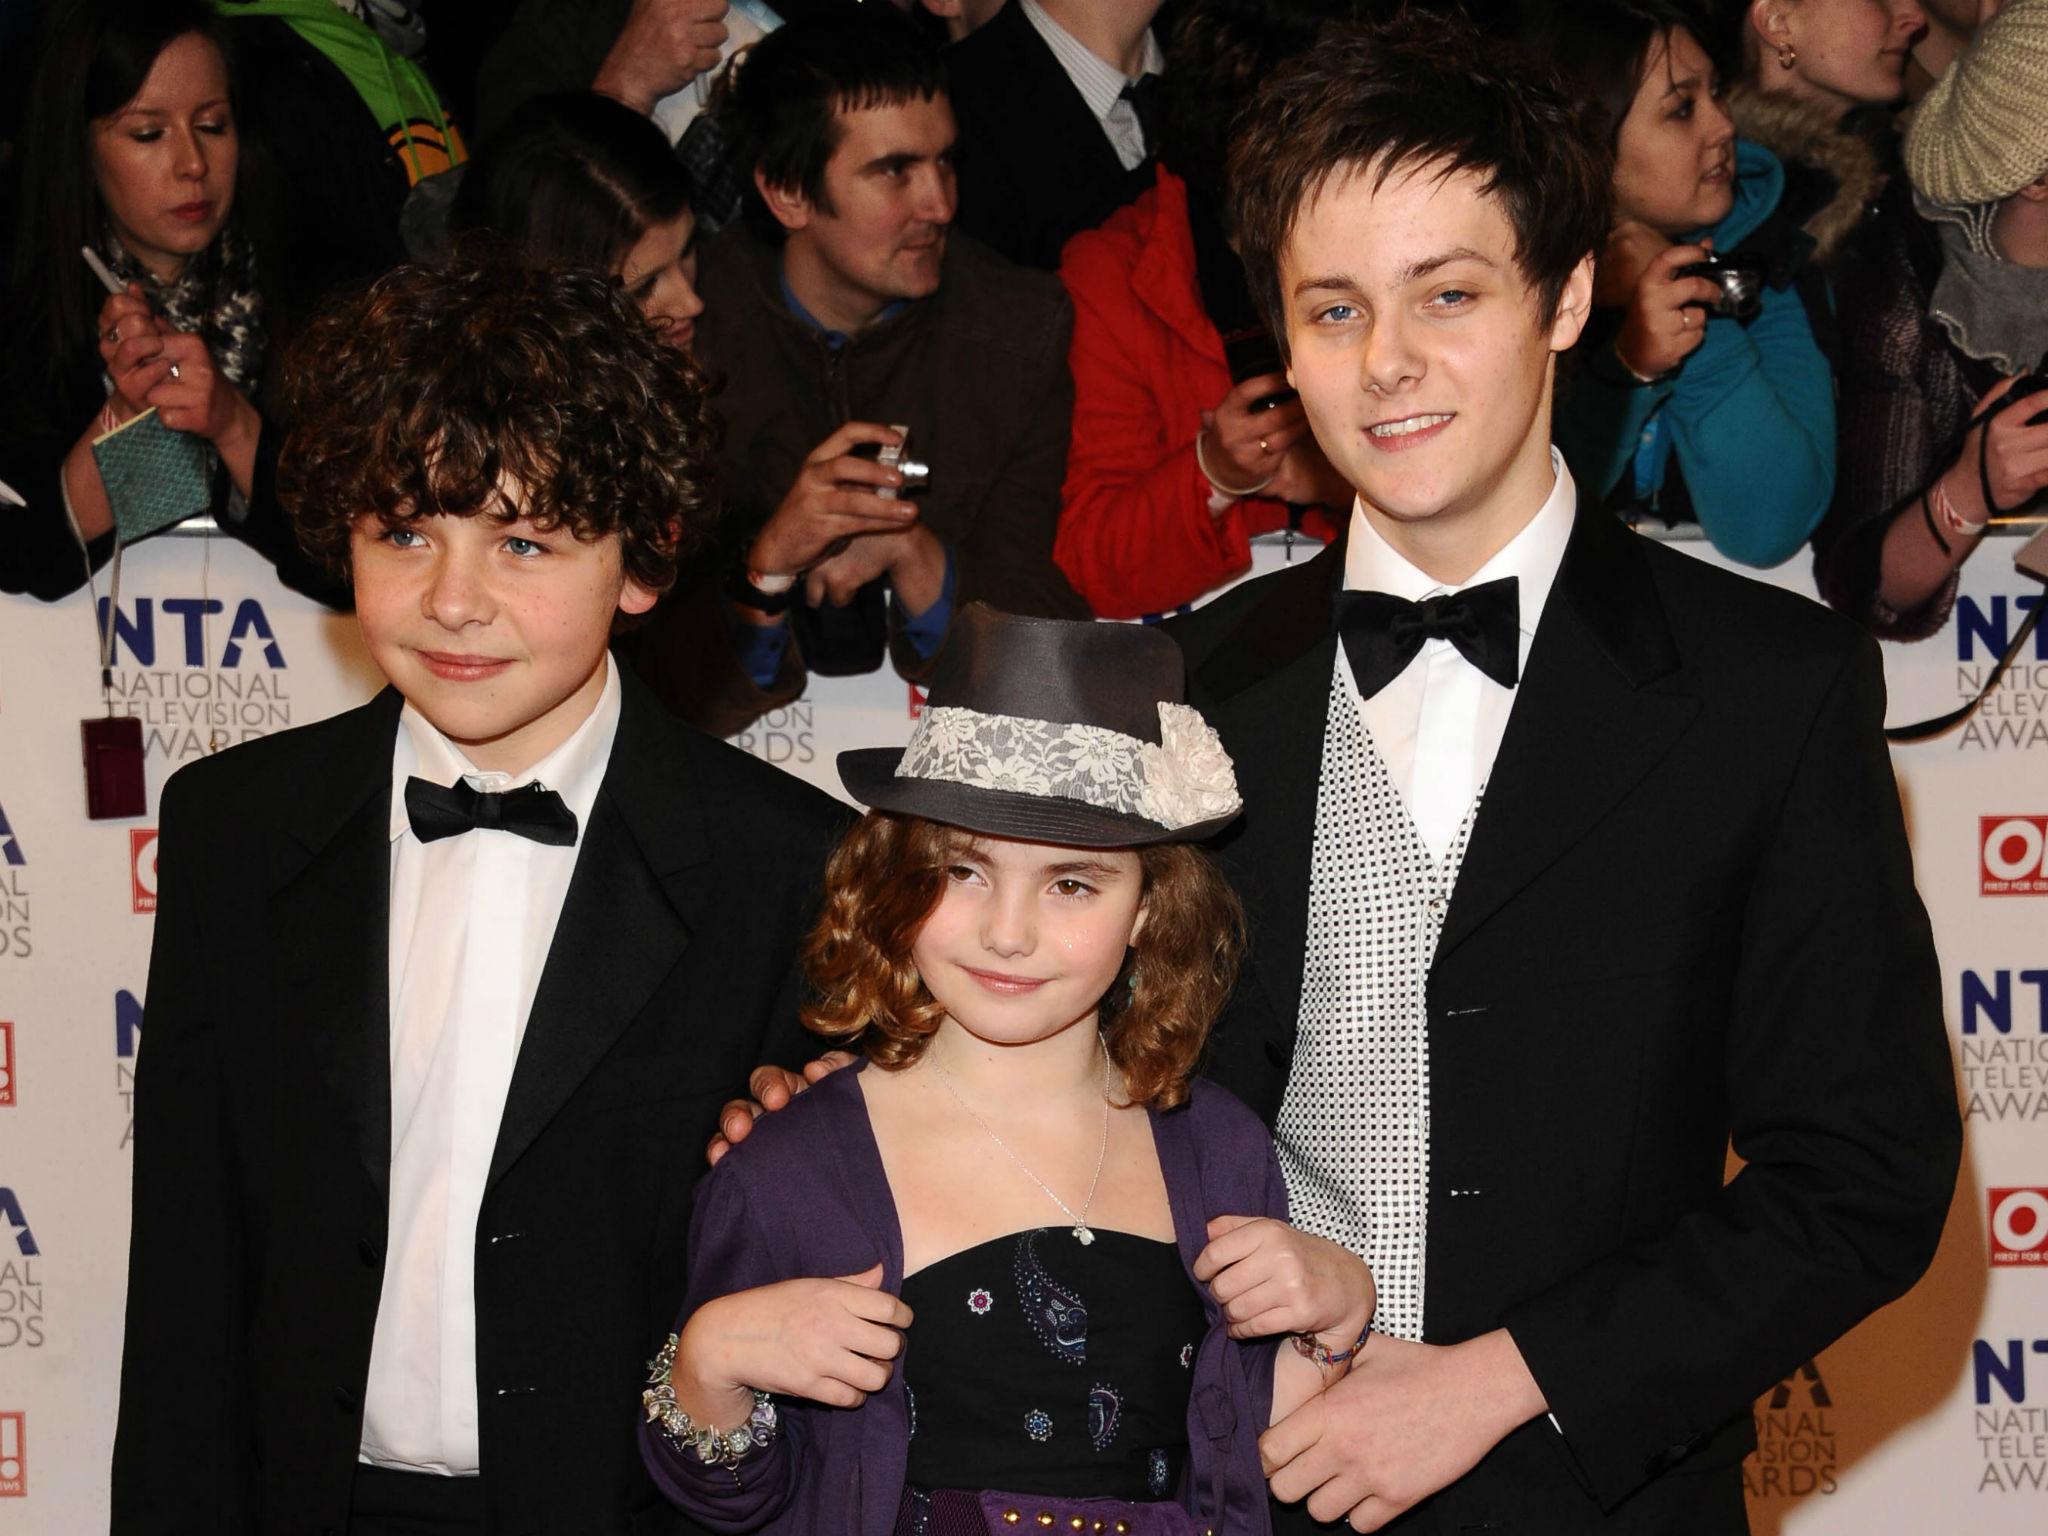 From Left to Right: Daniel Roche, Ramona Marquez and Tyger Drew-Honey in 2011